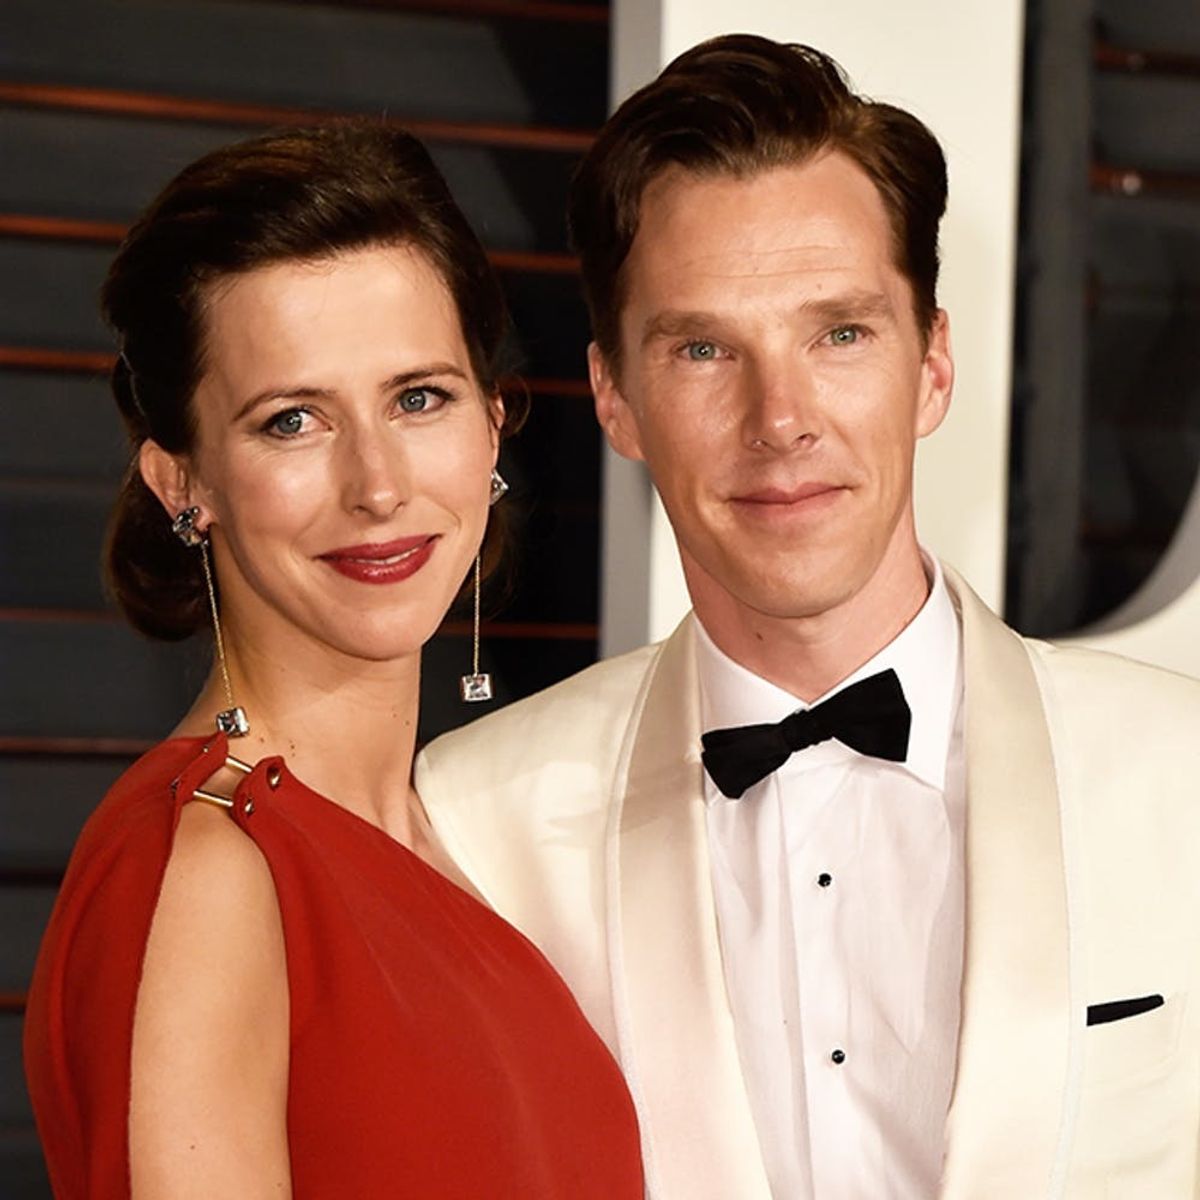 #Cumberbaby Is Here: 7 Baby Name Predictions for Benedict Cumberbatch’s Baby